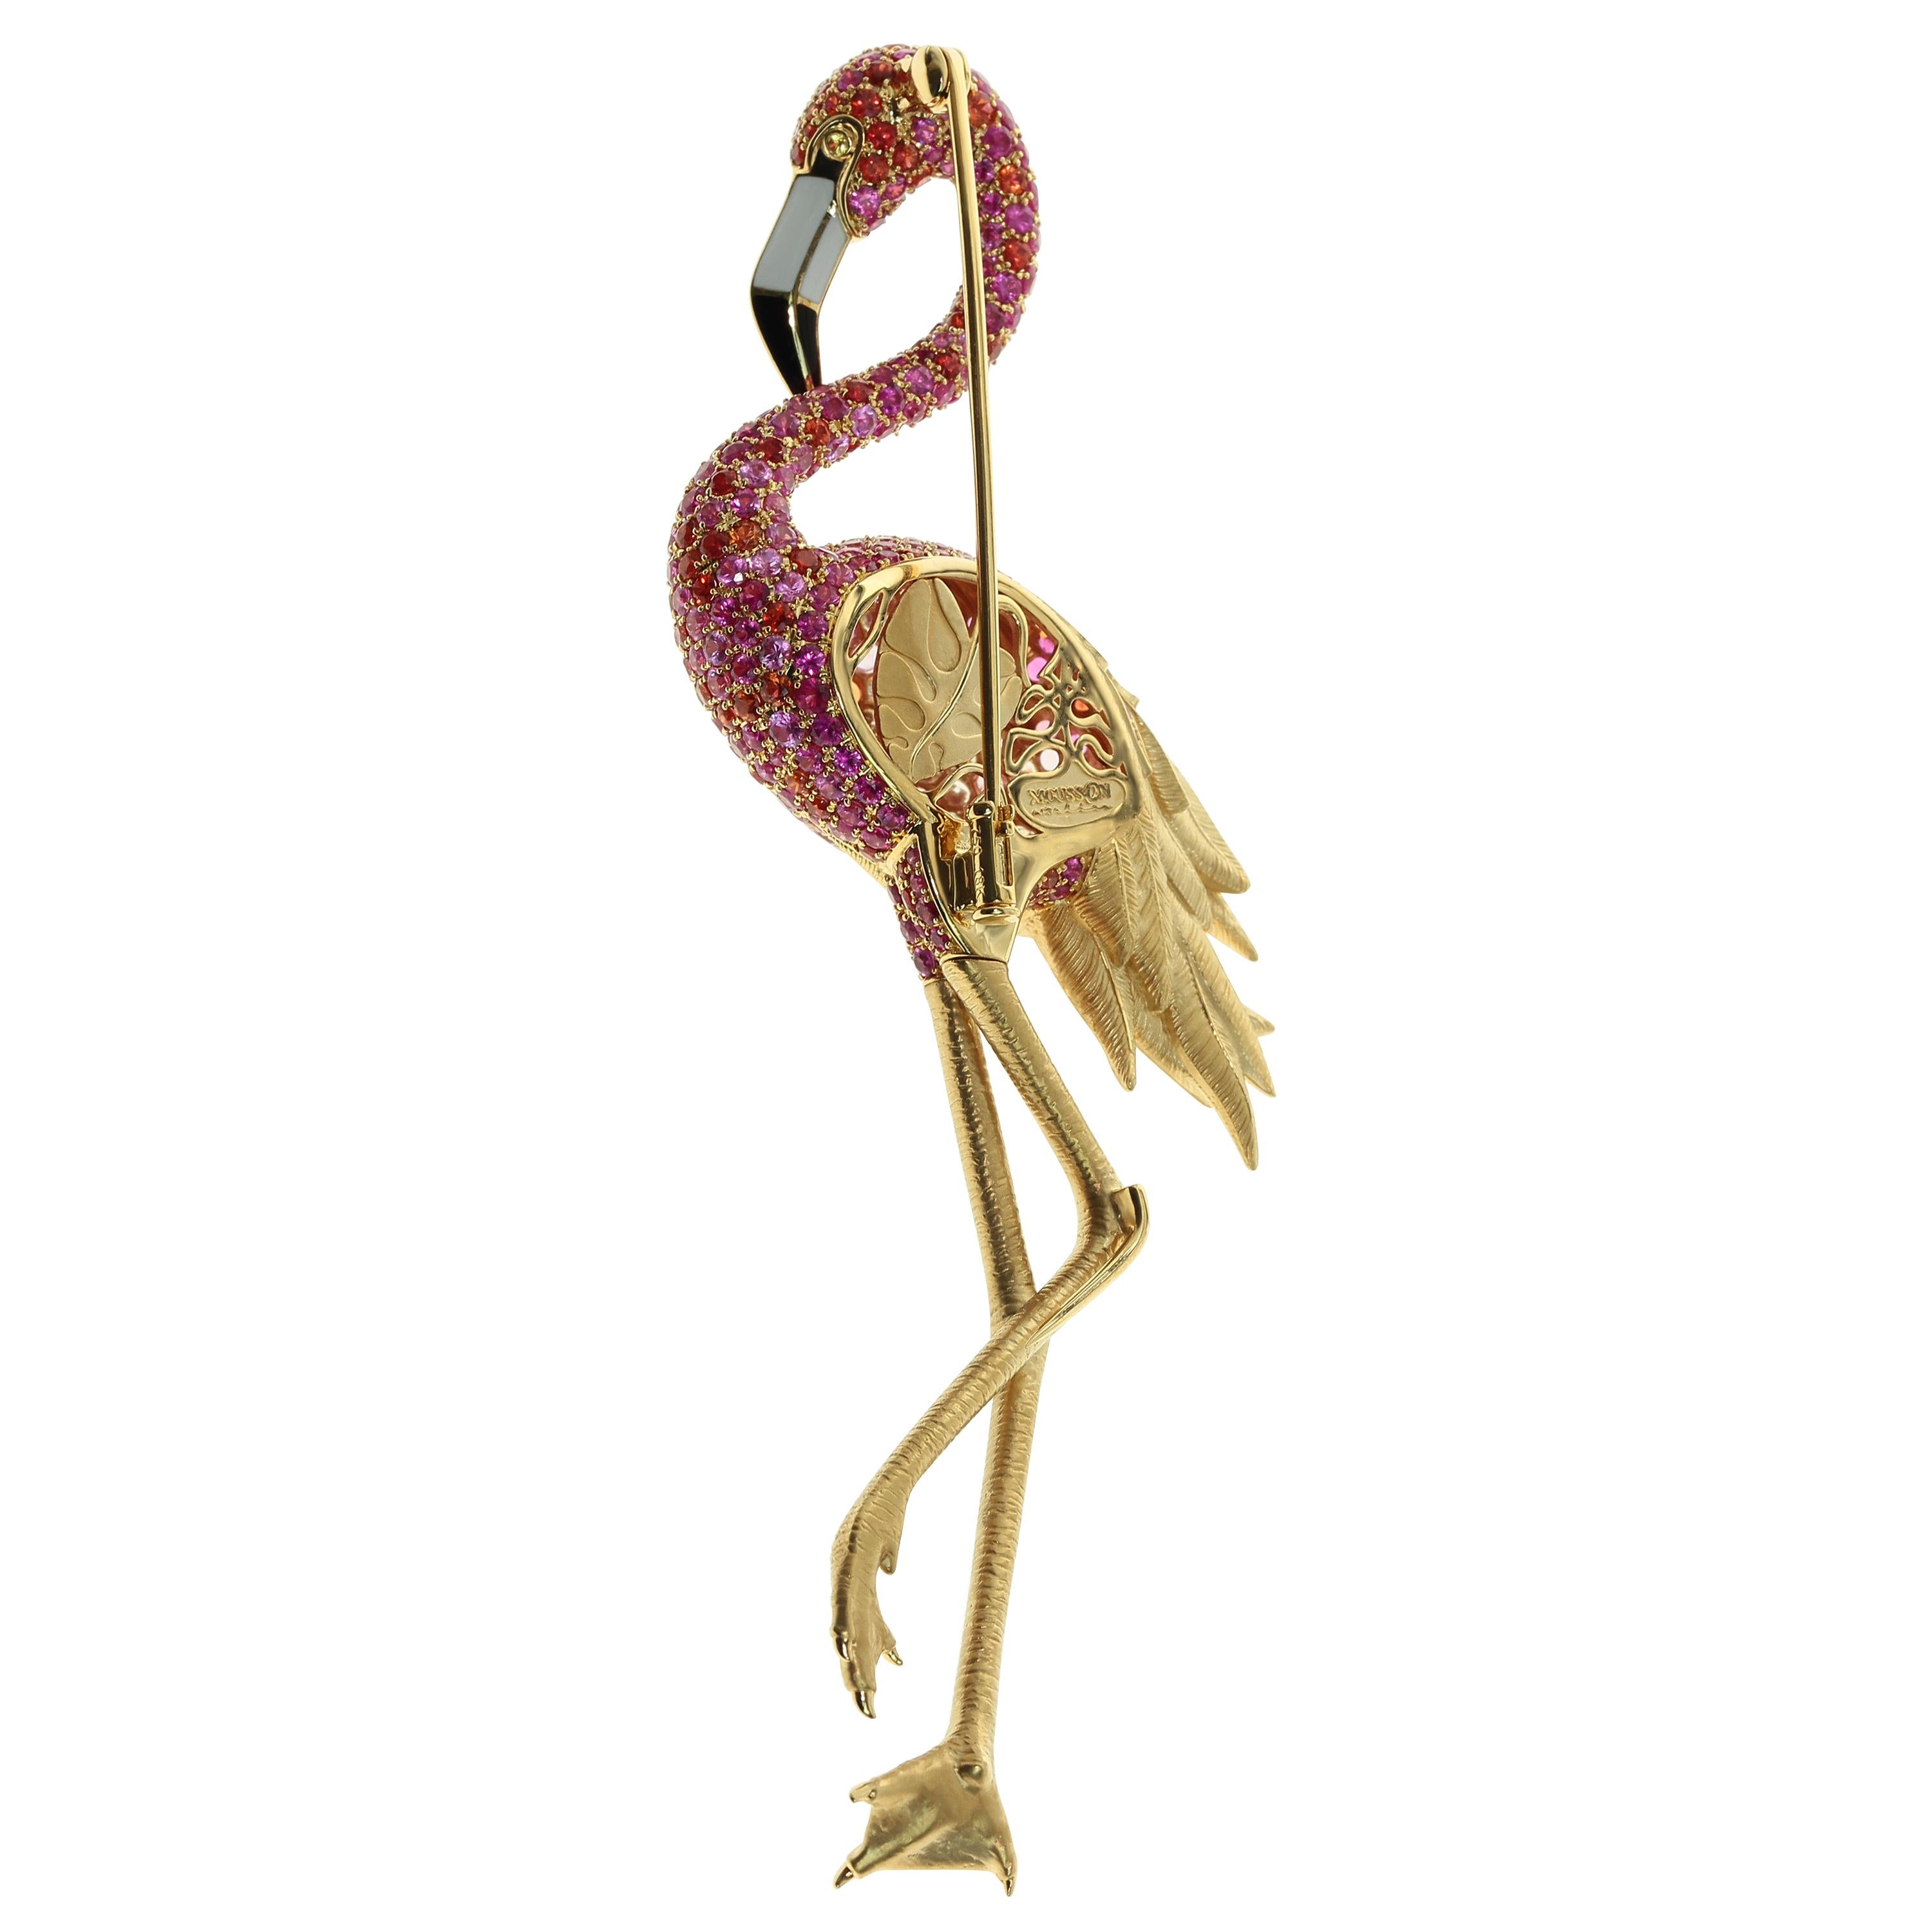 Diamond Pink Orange Sapphire Enamel 18 Karat Yellow Gold Flamingo Brooch
We decided to represent one of the most beautiful birds on earth - flamingos. The bird is made of 18 Karat Yellow Gold. The legs are made so realistic that every wrinkle and